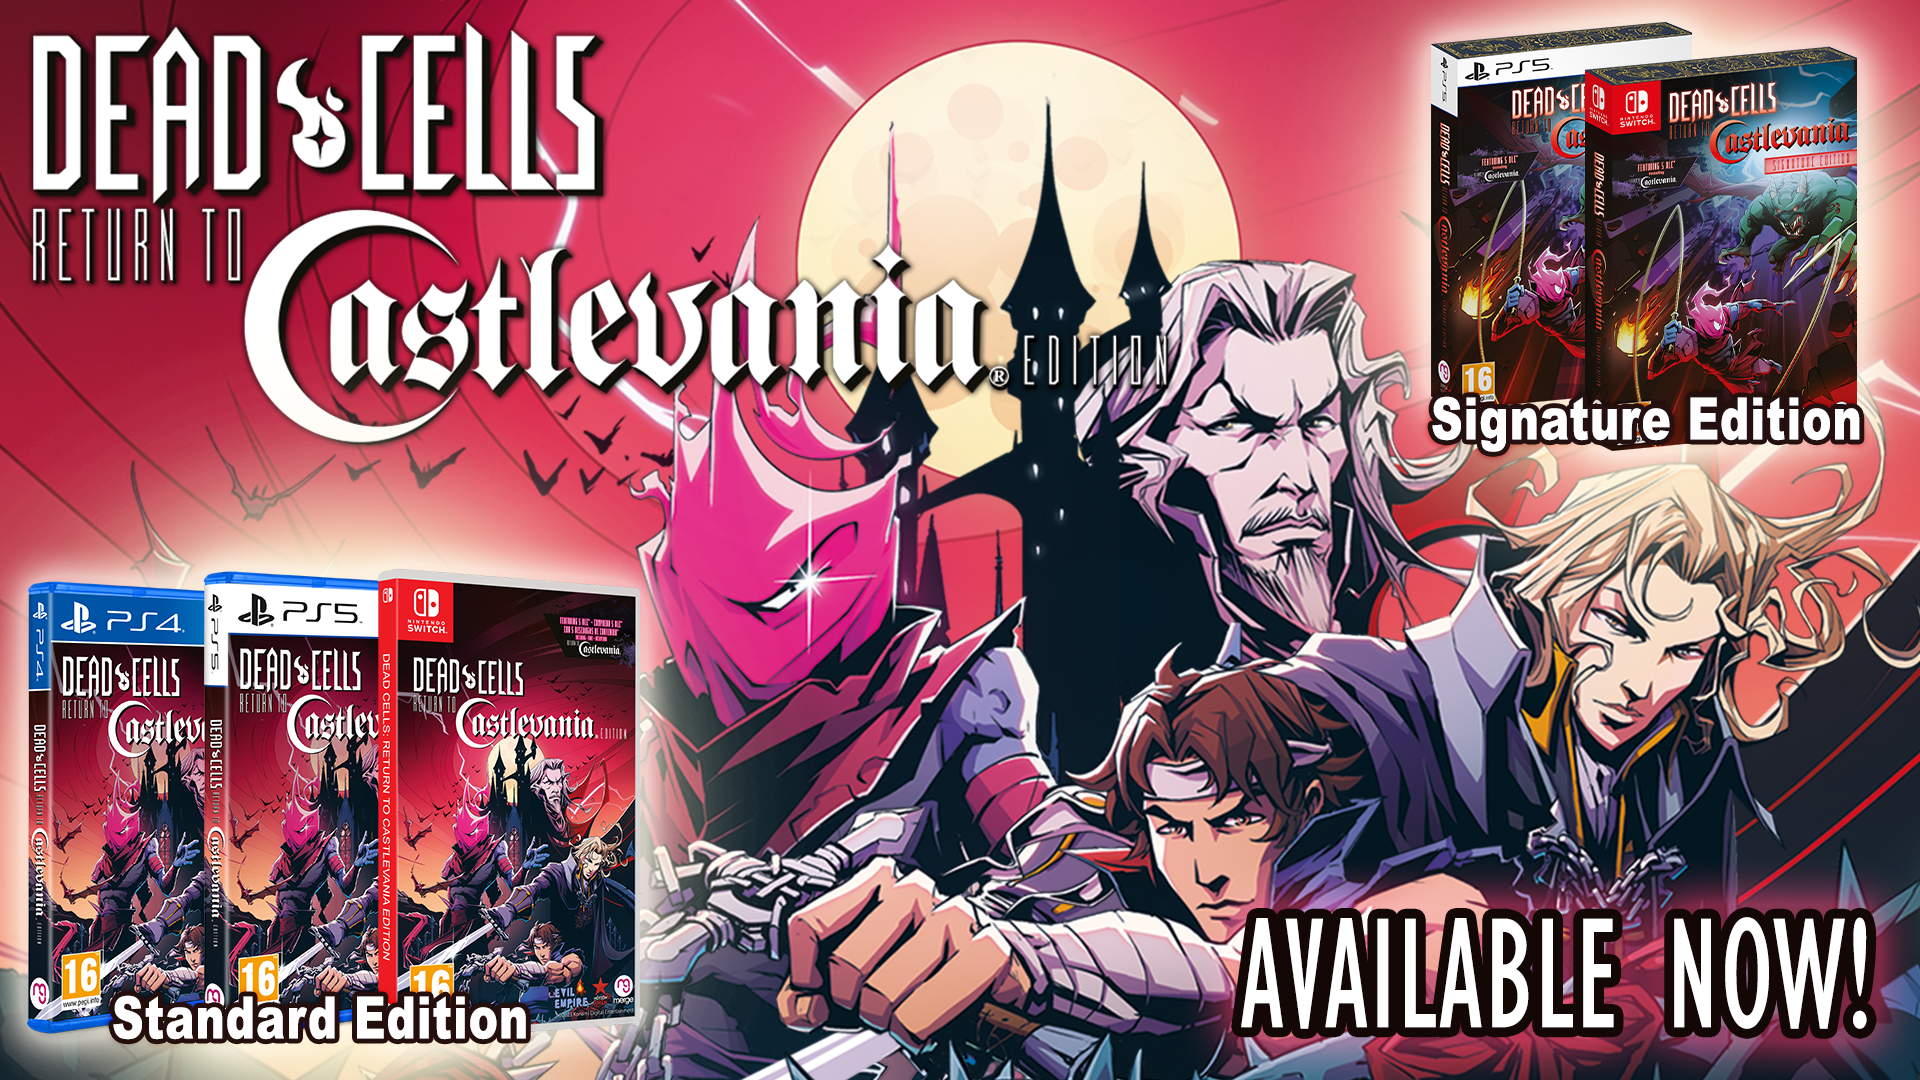 Dead Cells: Return To Castlevania is OUT NOW!